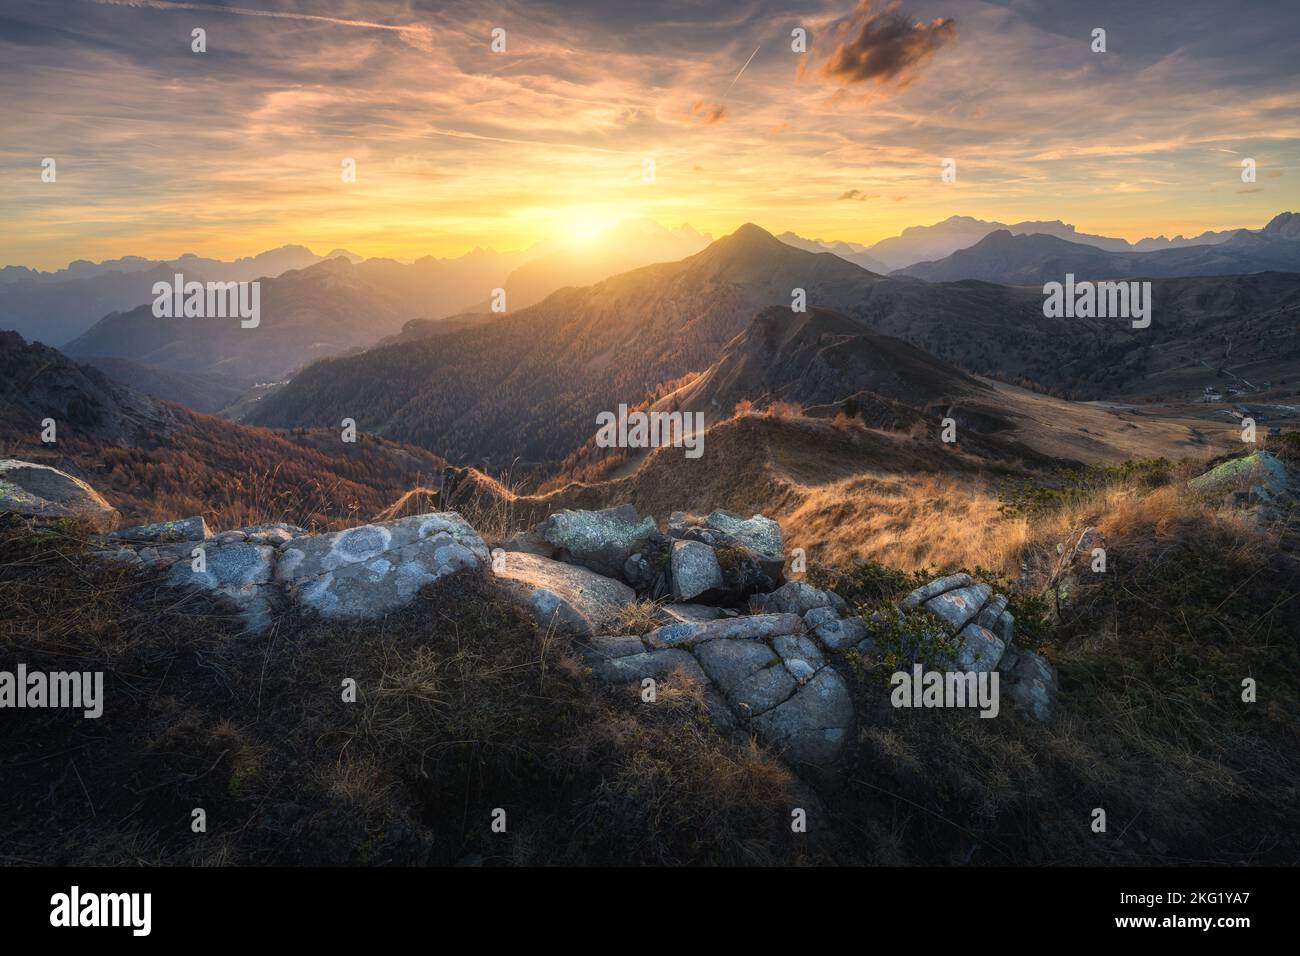 Stones and mountains at colorful sunset in autumn Stock Photo